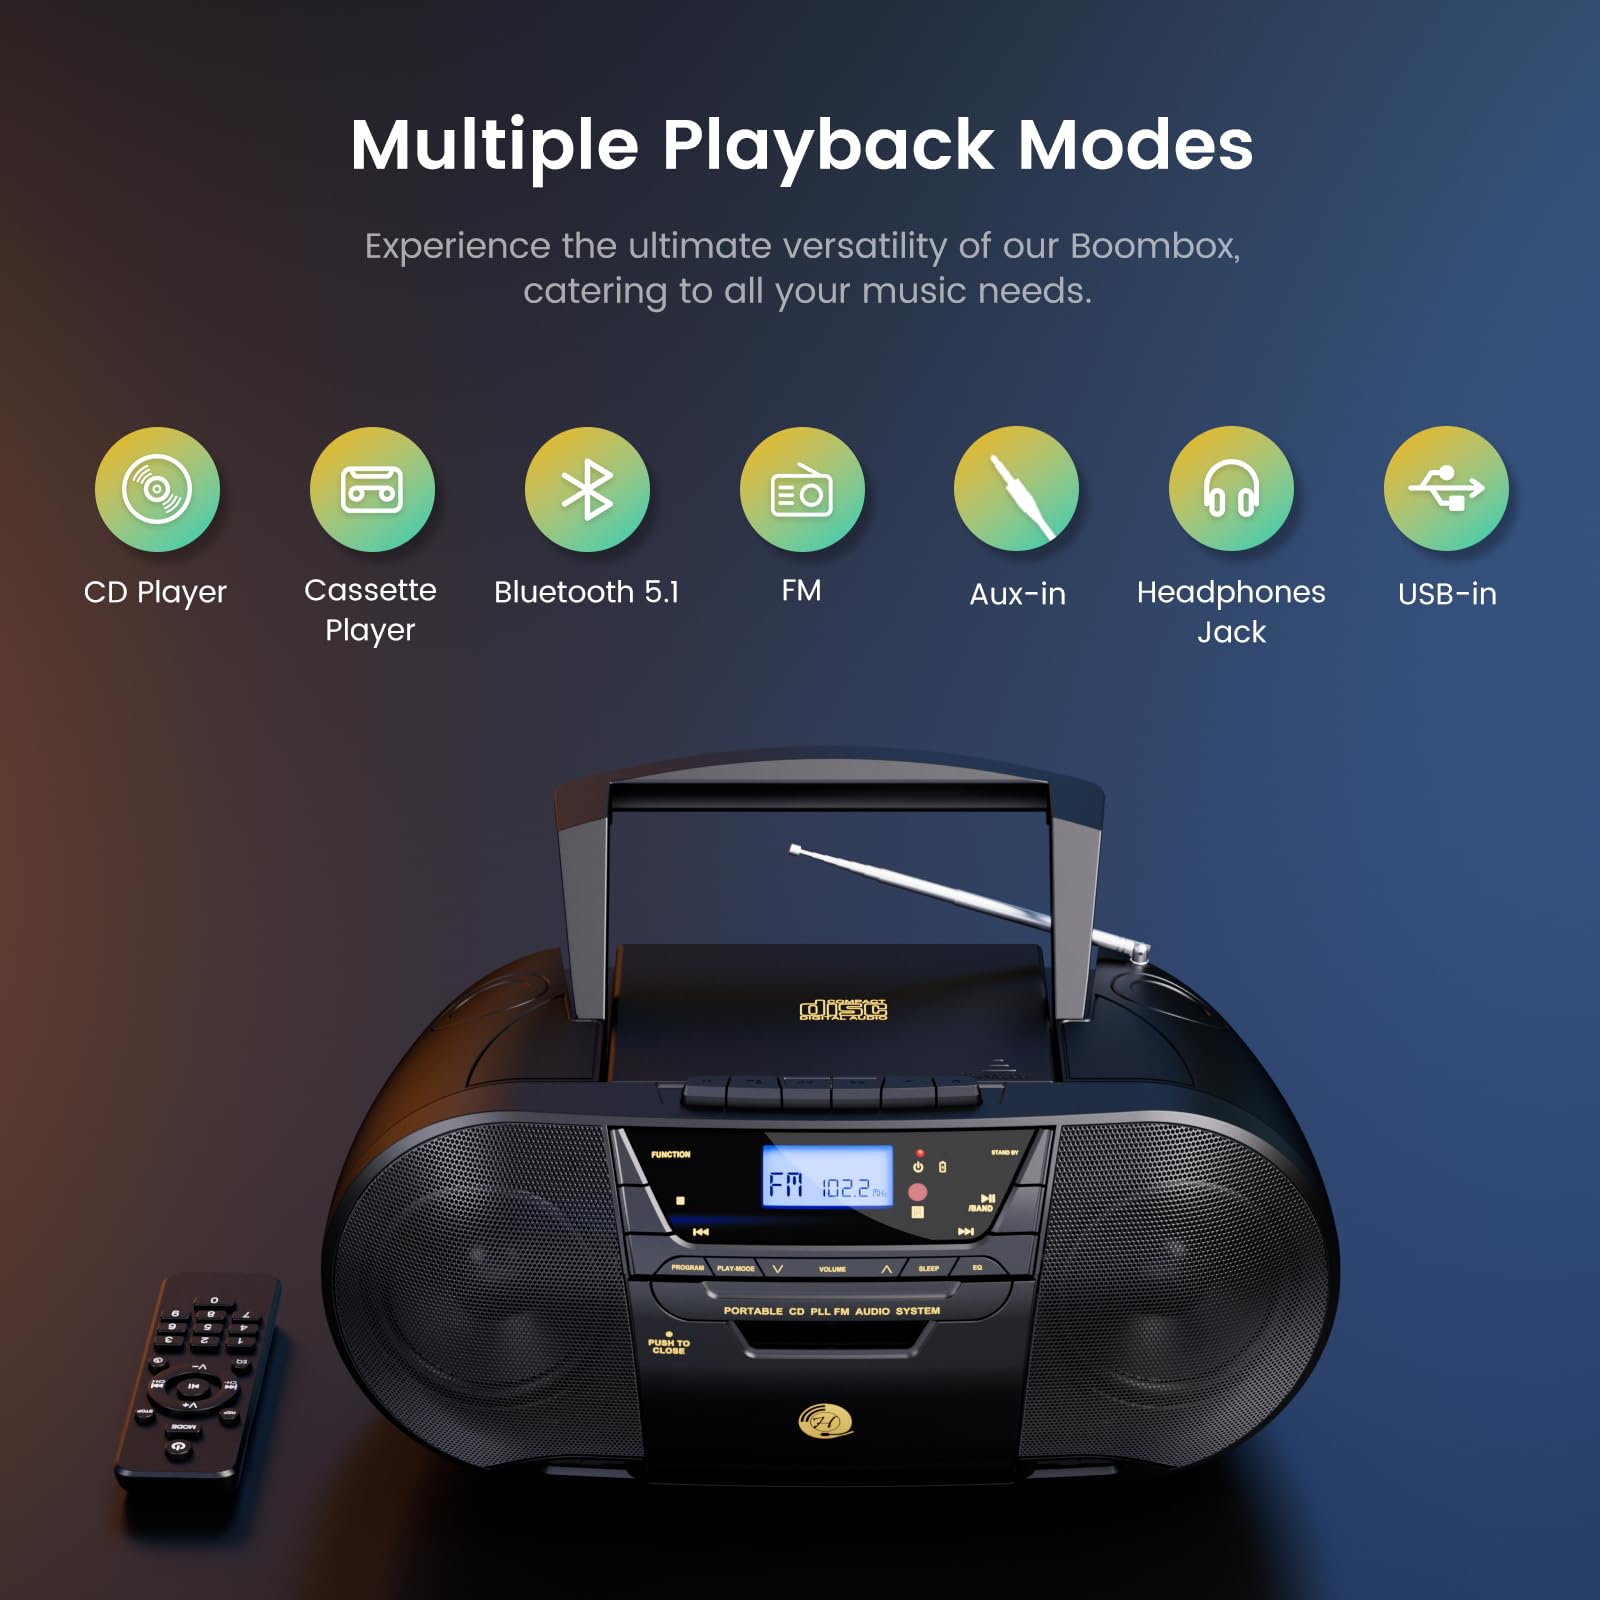 Boom Box CD and Cassette Tape Player, Hernpark Rechargeable CD Tape Player with Remote Control, Bluetooth, FM Radio, Sleep Mode, Stereo Sound, EQ Mode, USB Drive, Aux/Headphones Jack (Black)